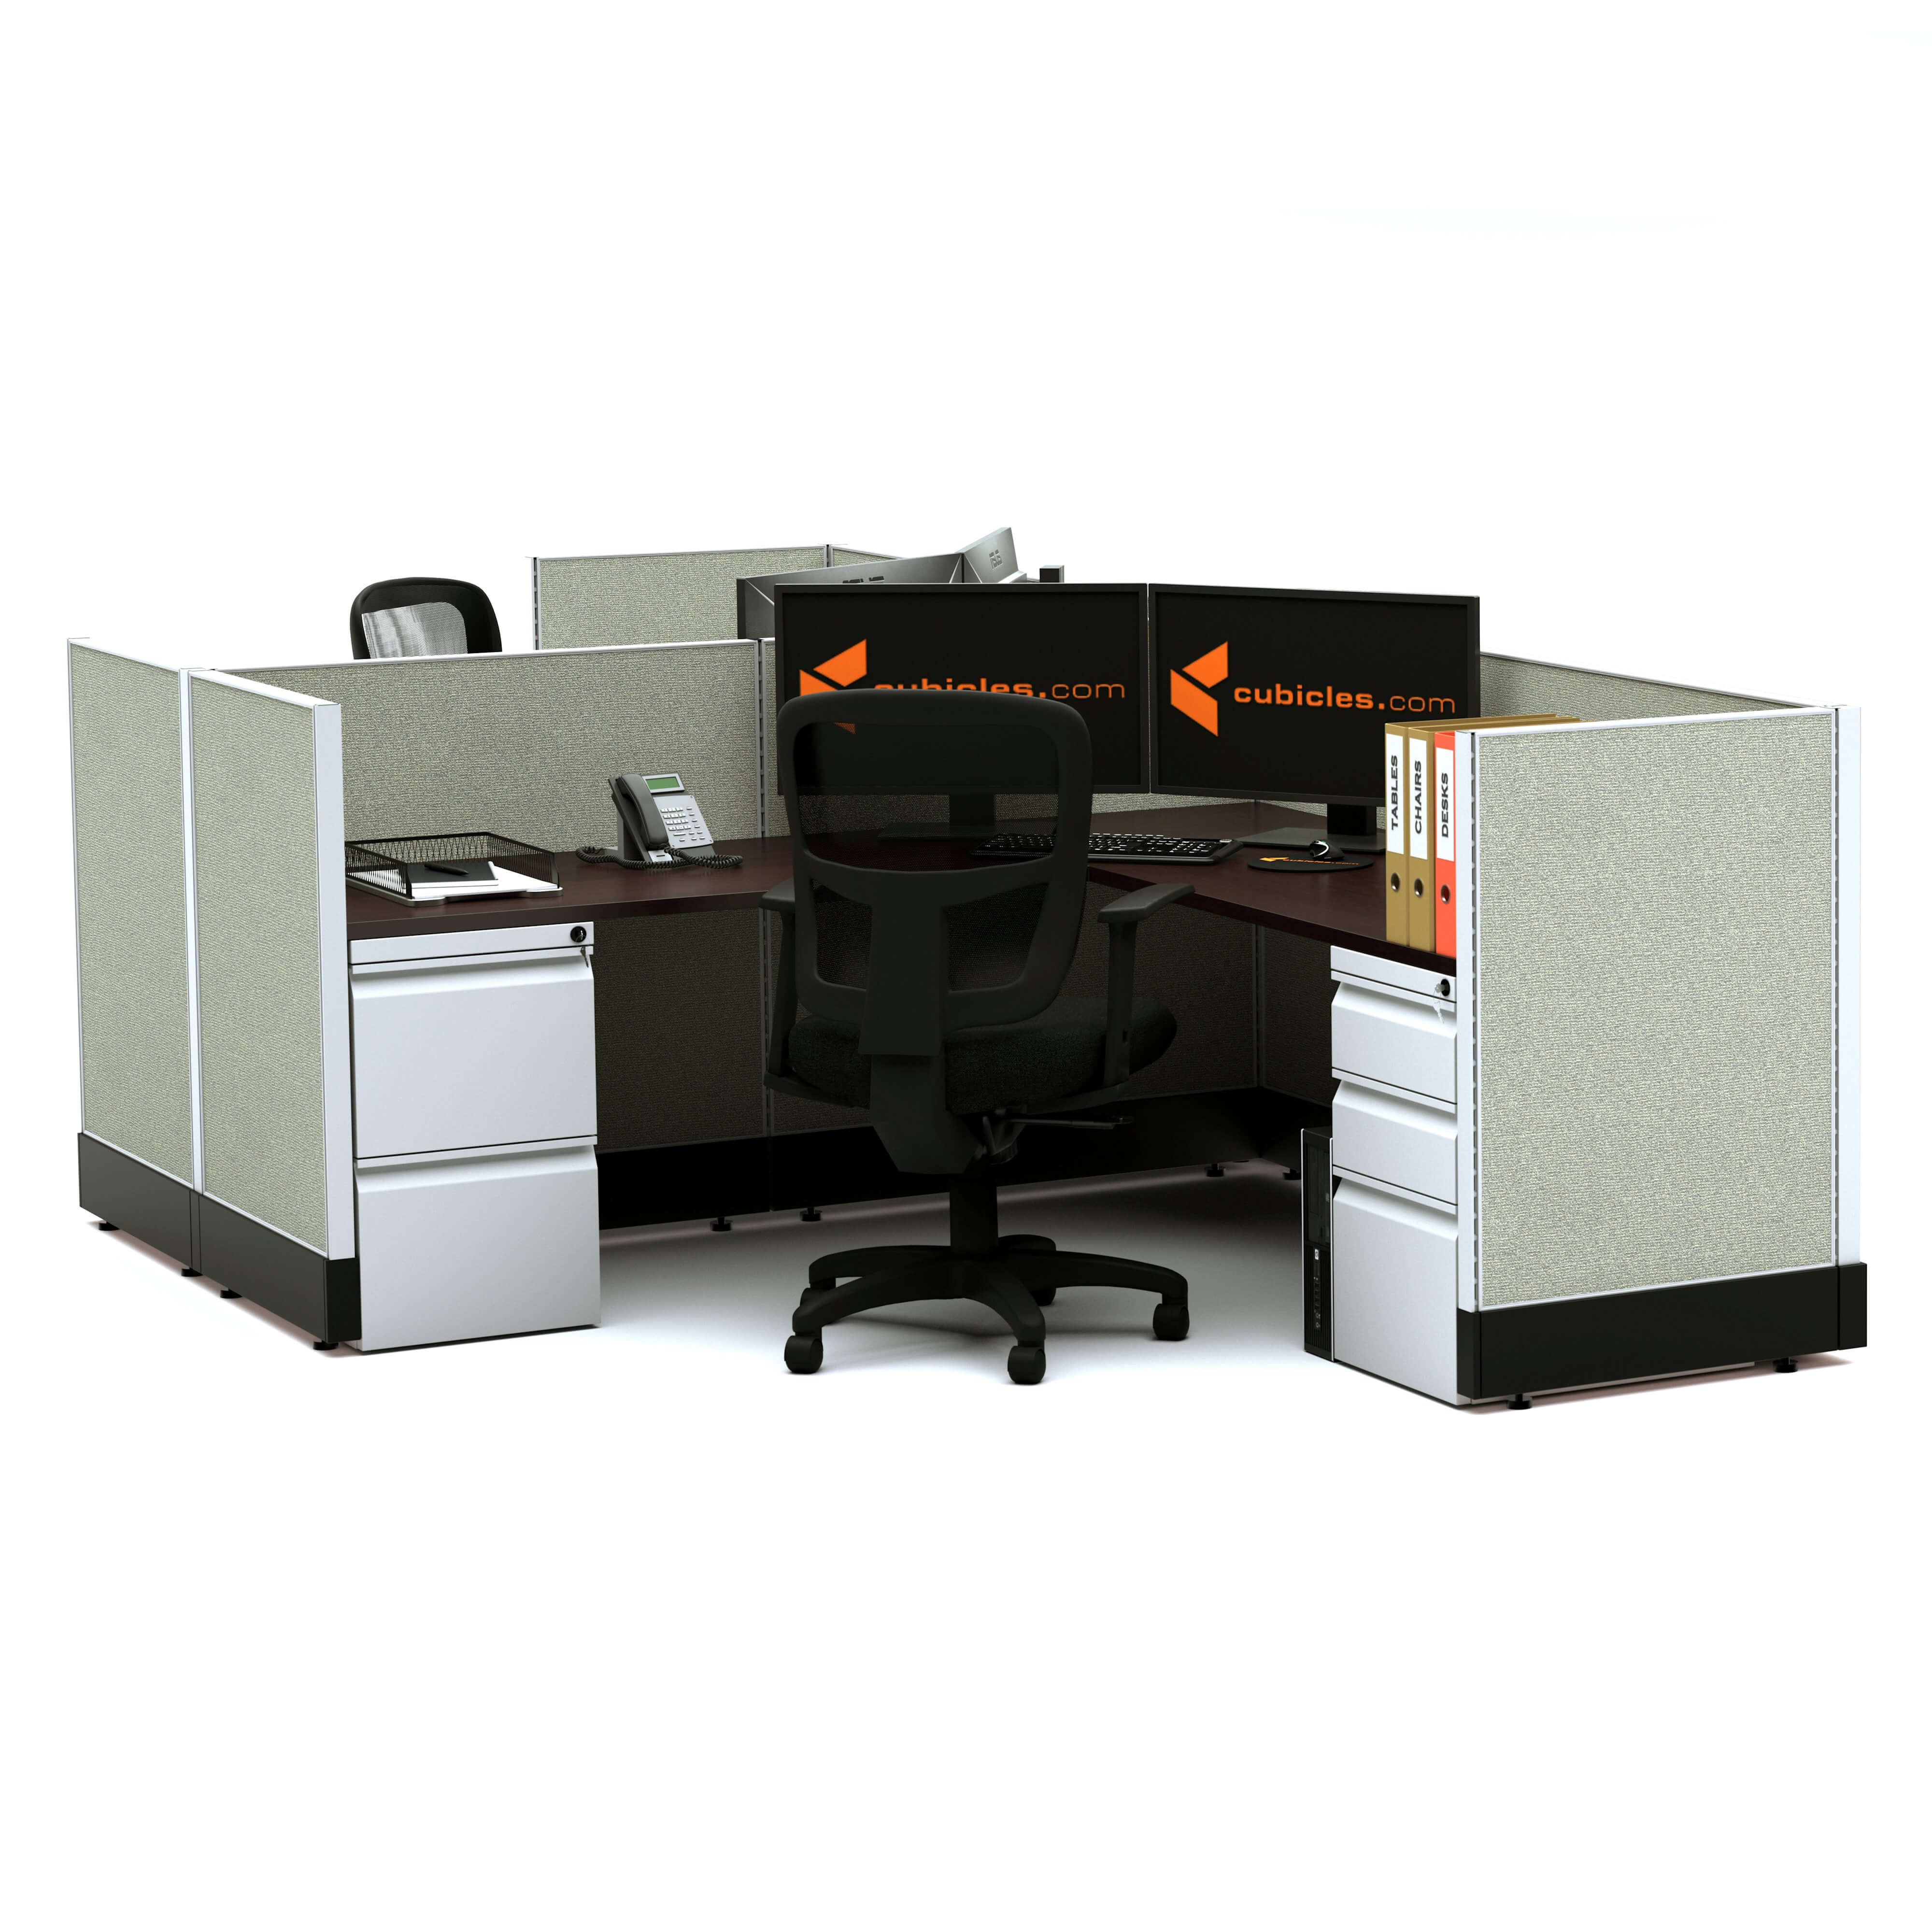 modular-office-furniture-system-furniture-39-2pack-clustered-powered.jpg